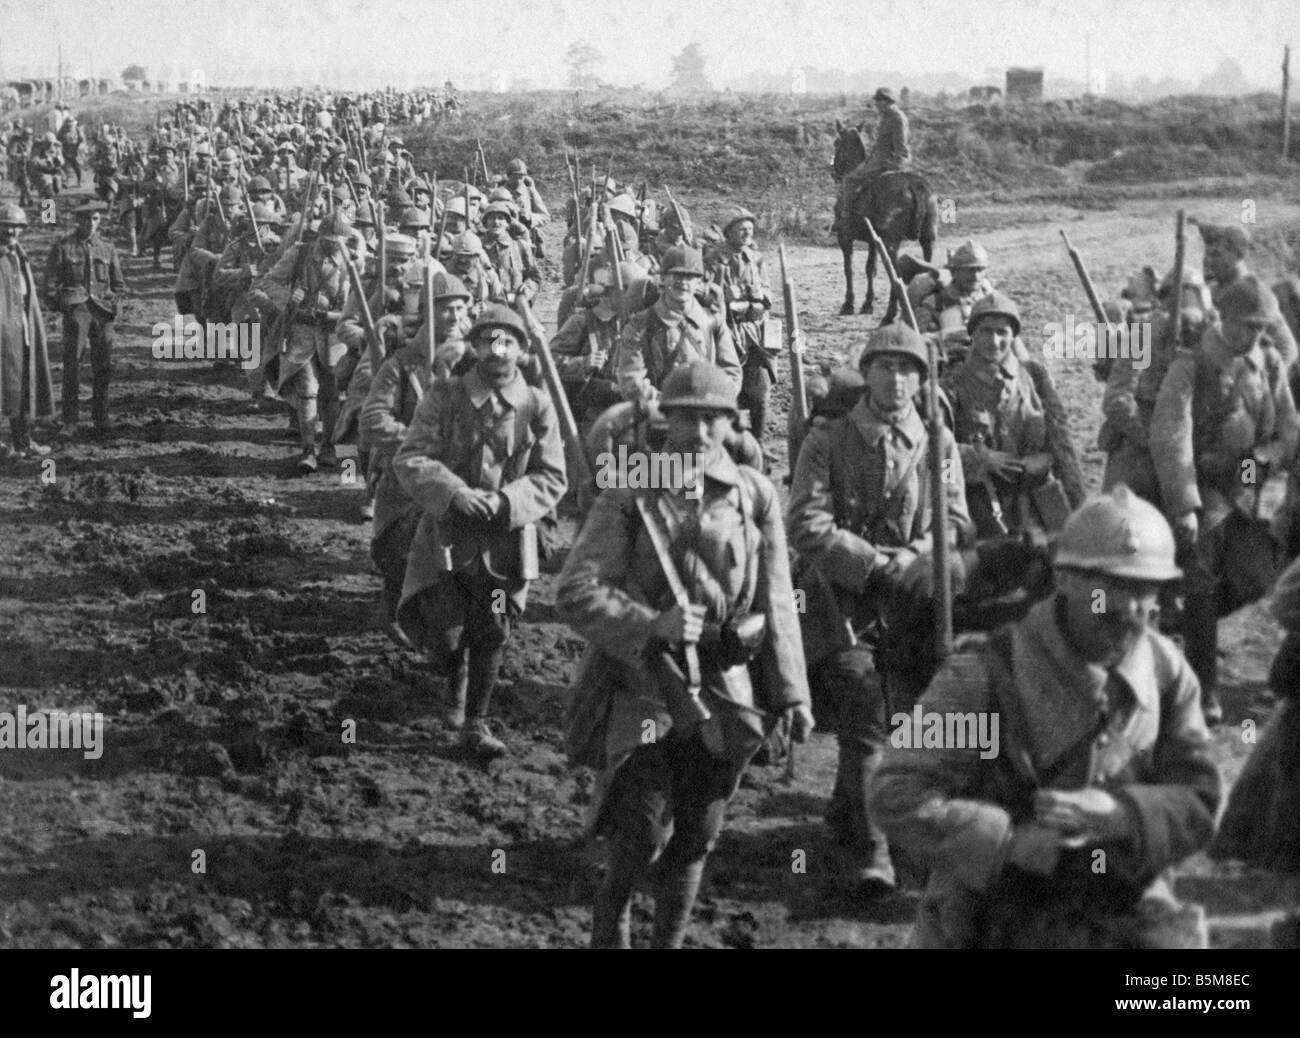 2 G55 F1 1916 64 WW1 French troops return from Front History World War One France Trench warfare at Verdun French troops return Stock Photo